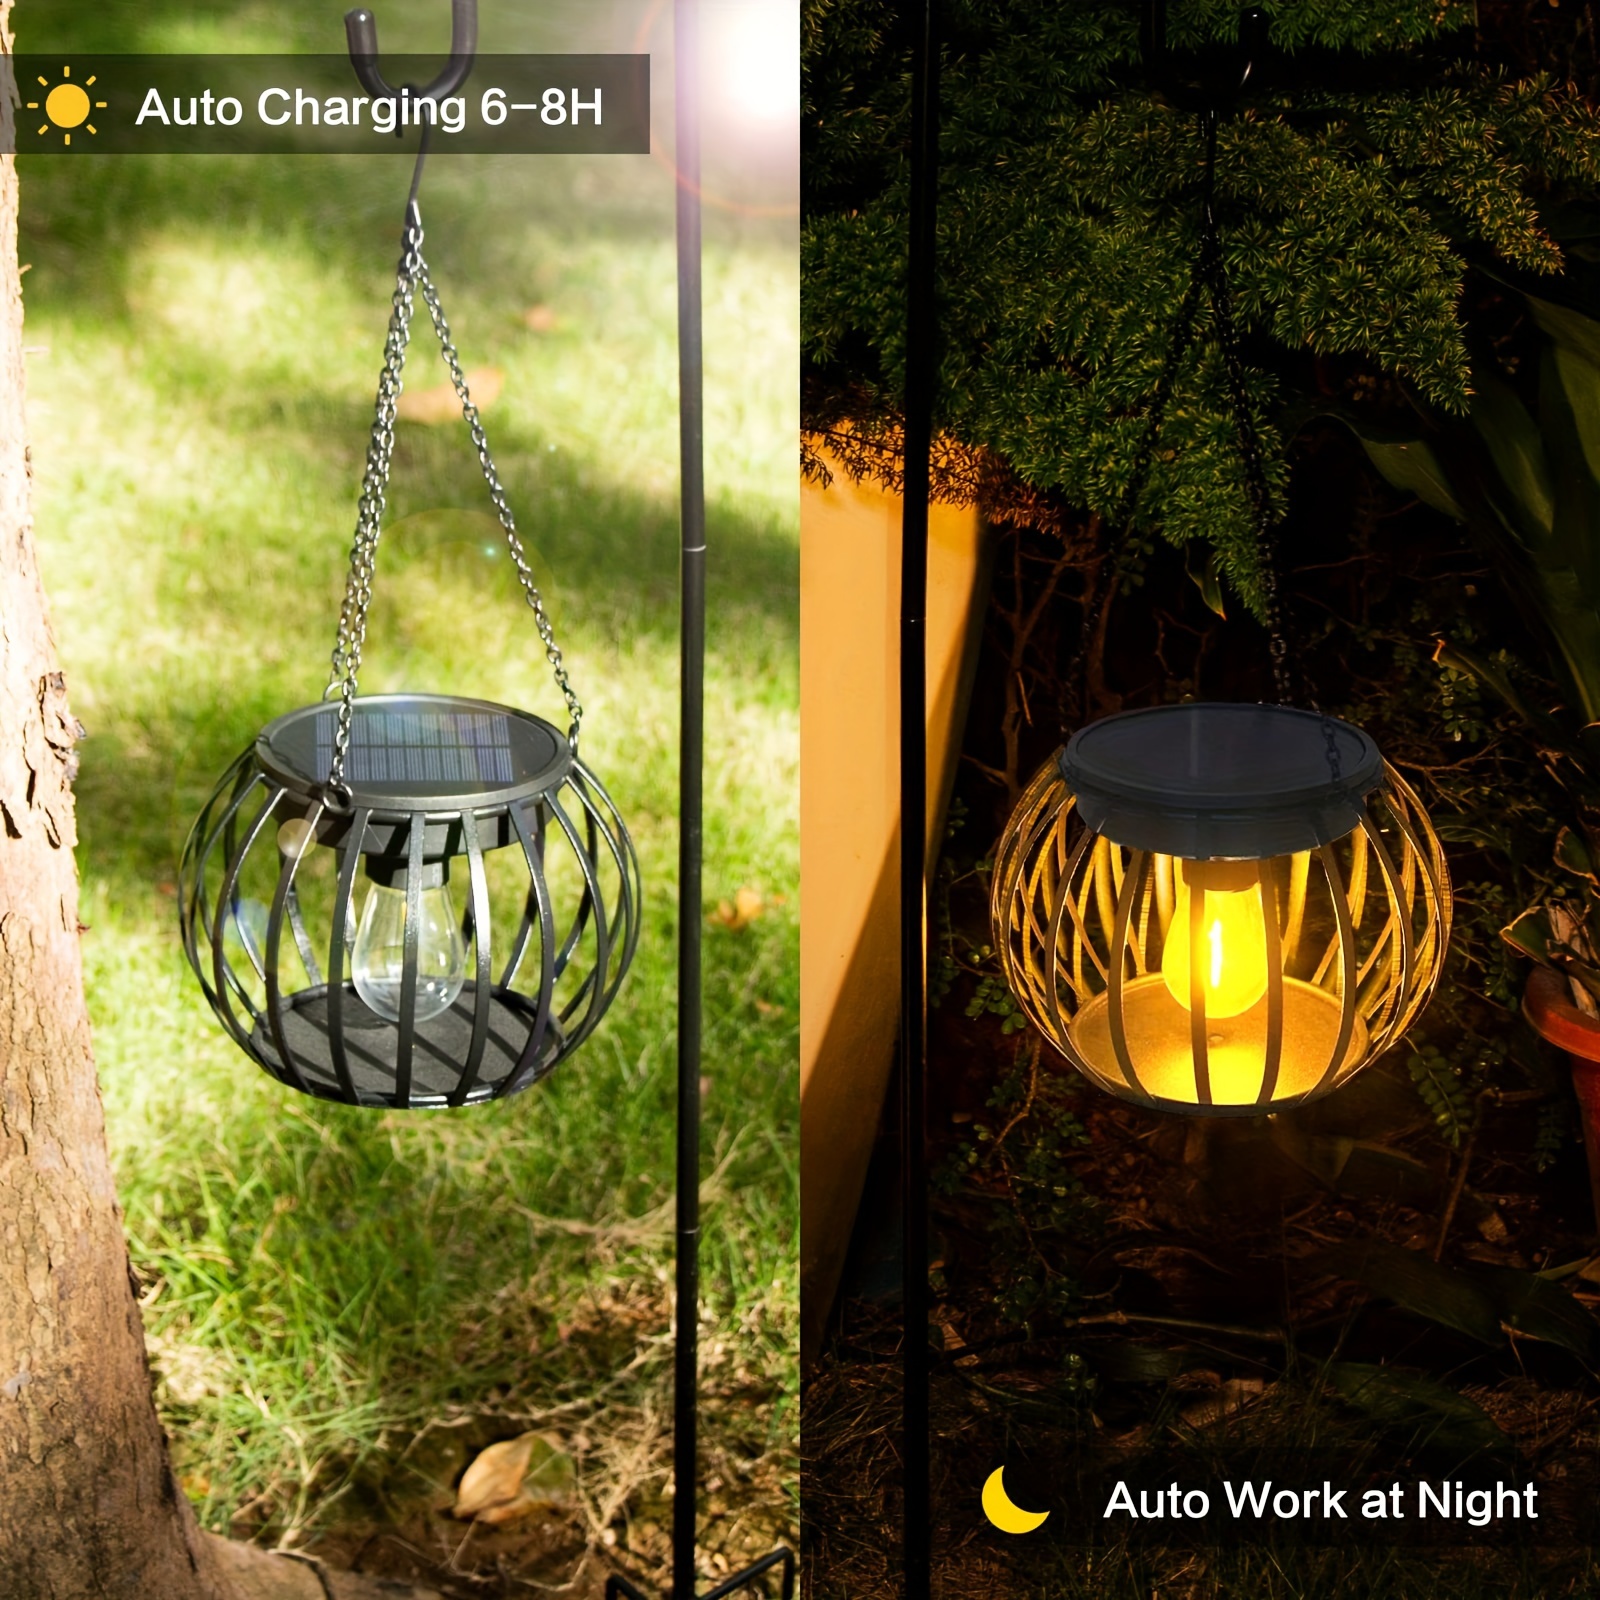 Mini Hanging Camping Lantern USB Outdoor Light Water Resistant Garden Lamp  with 2 Lighting Modes for Garden Yard Patio Tree Decoration 